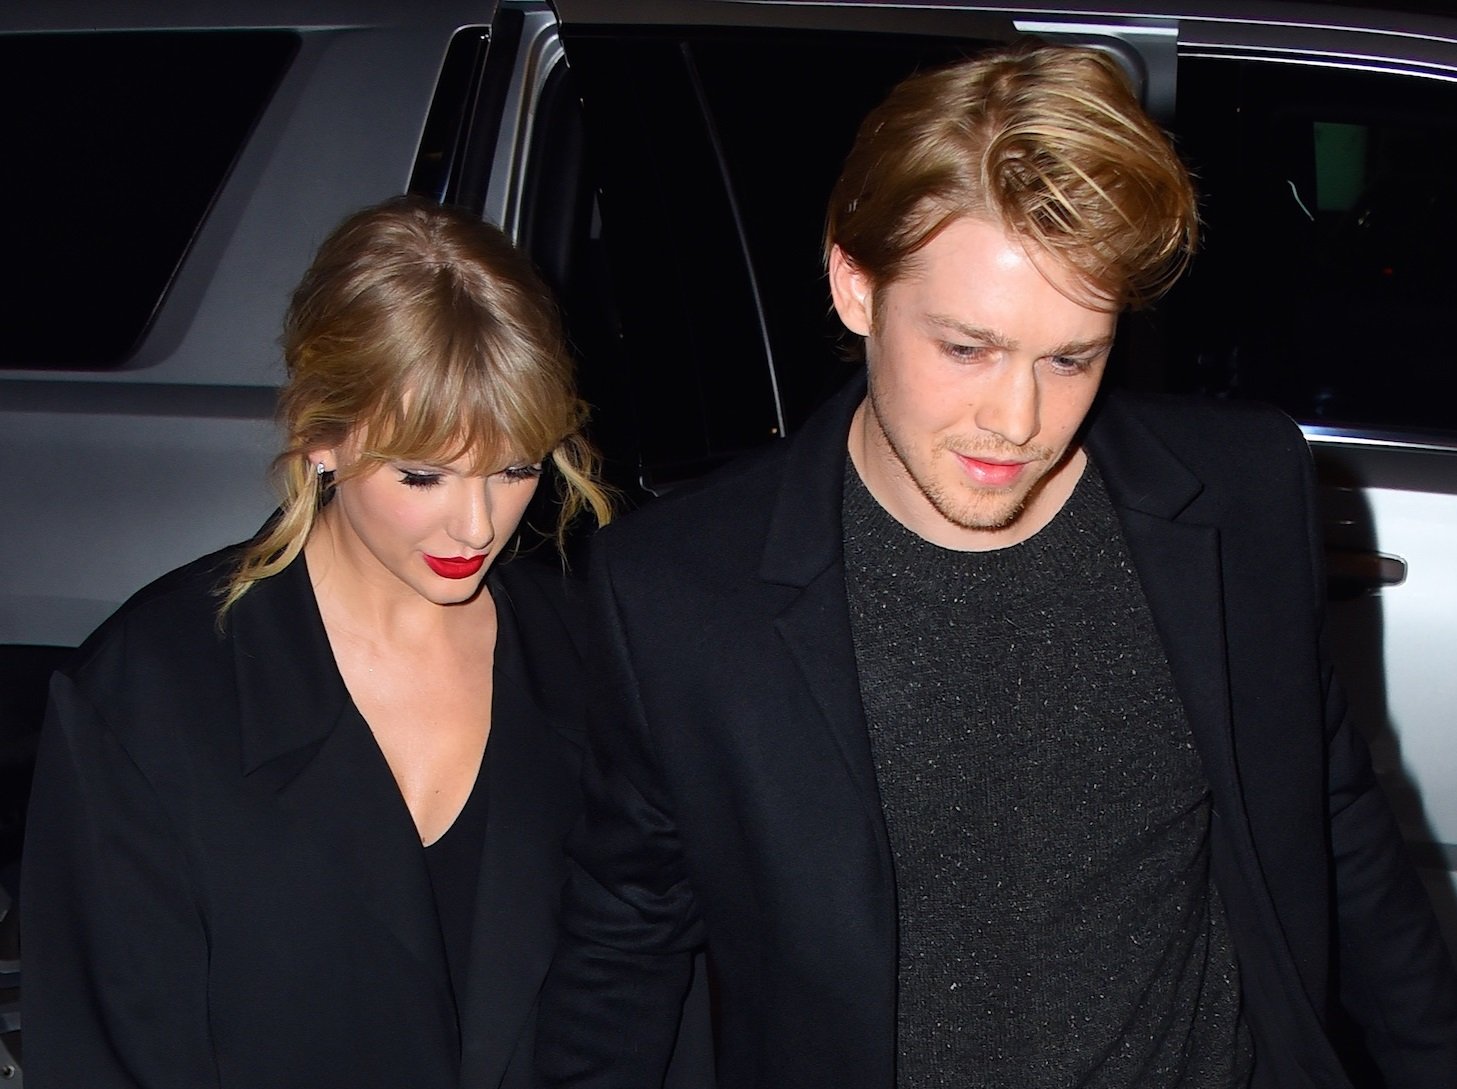 Taylor Swift and Joe Alwyn are seen at Zuma restaurant on  October 6, 2019 in New York City.